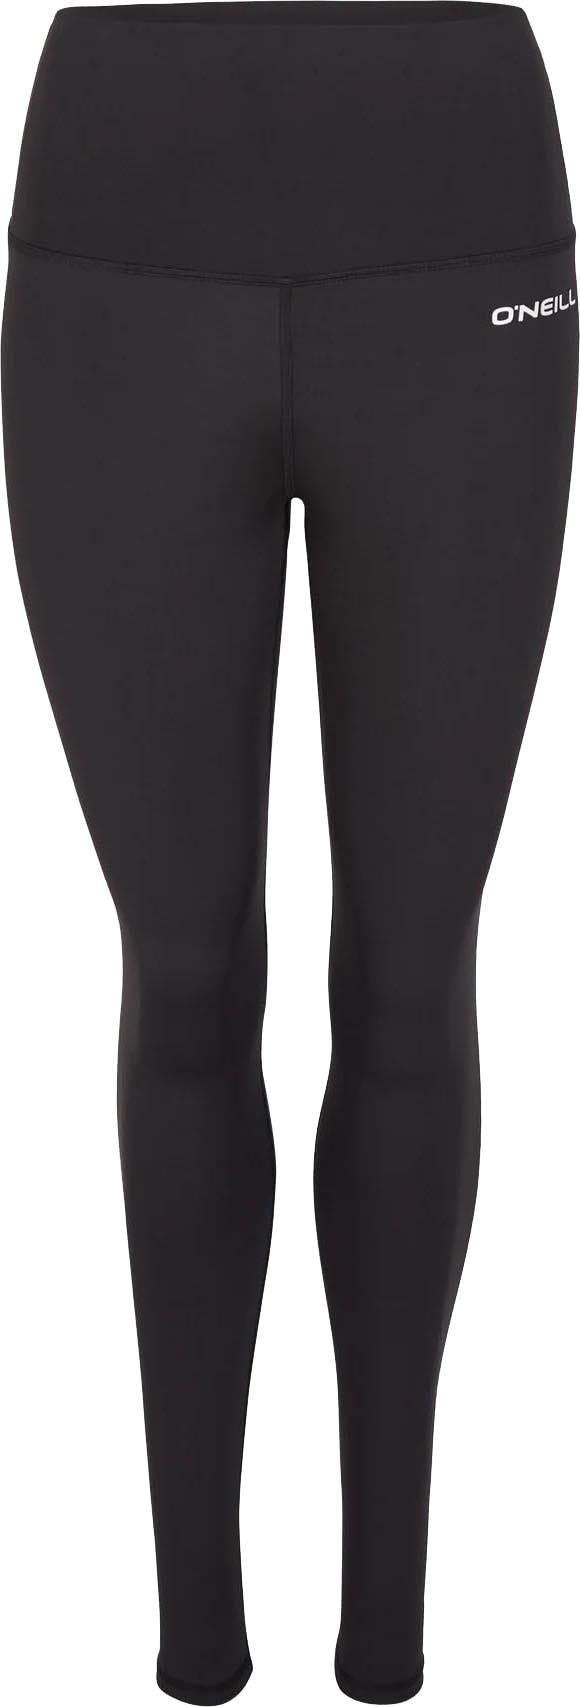 Product image for Active Leggings - Women’s